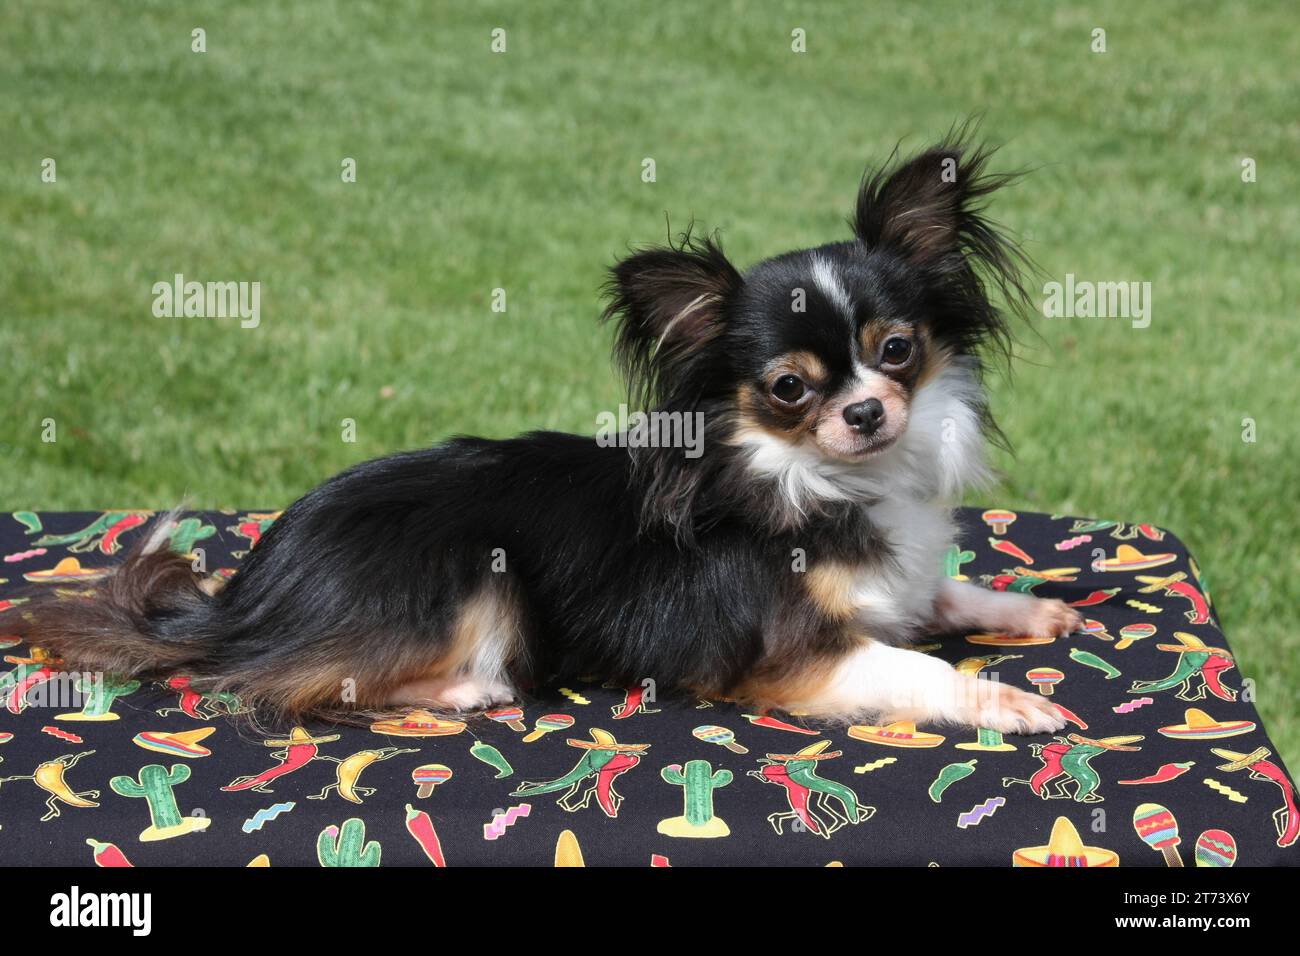 Longhaired Chihuahua lying on materila with pepper design. Lawned in background Stock Photo